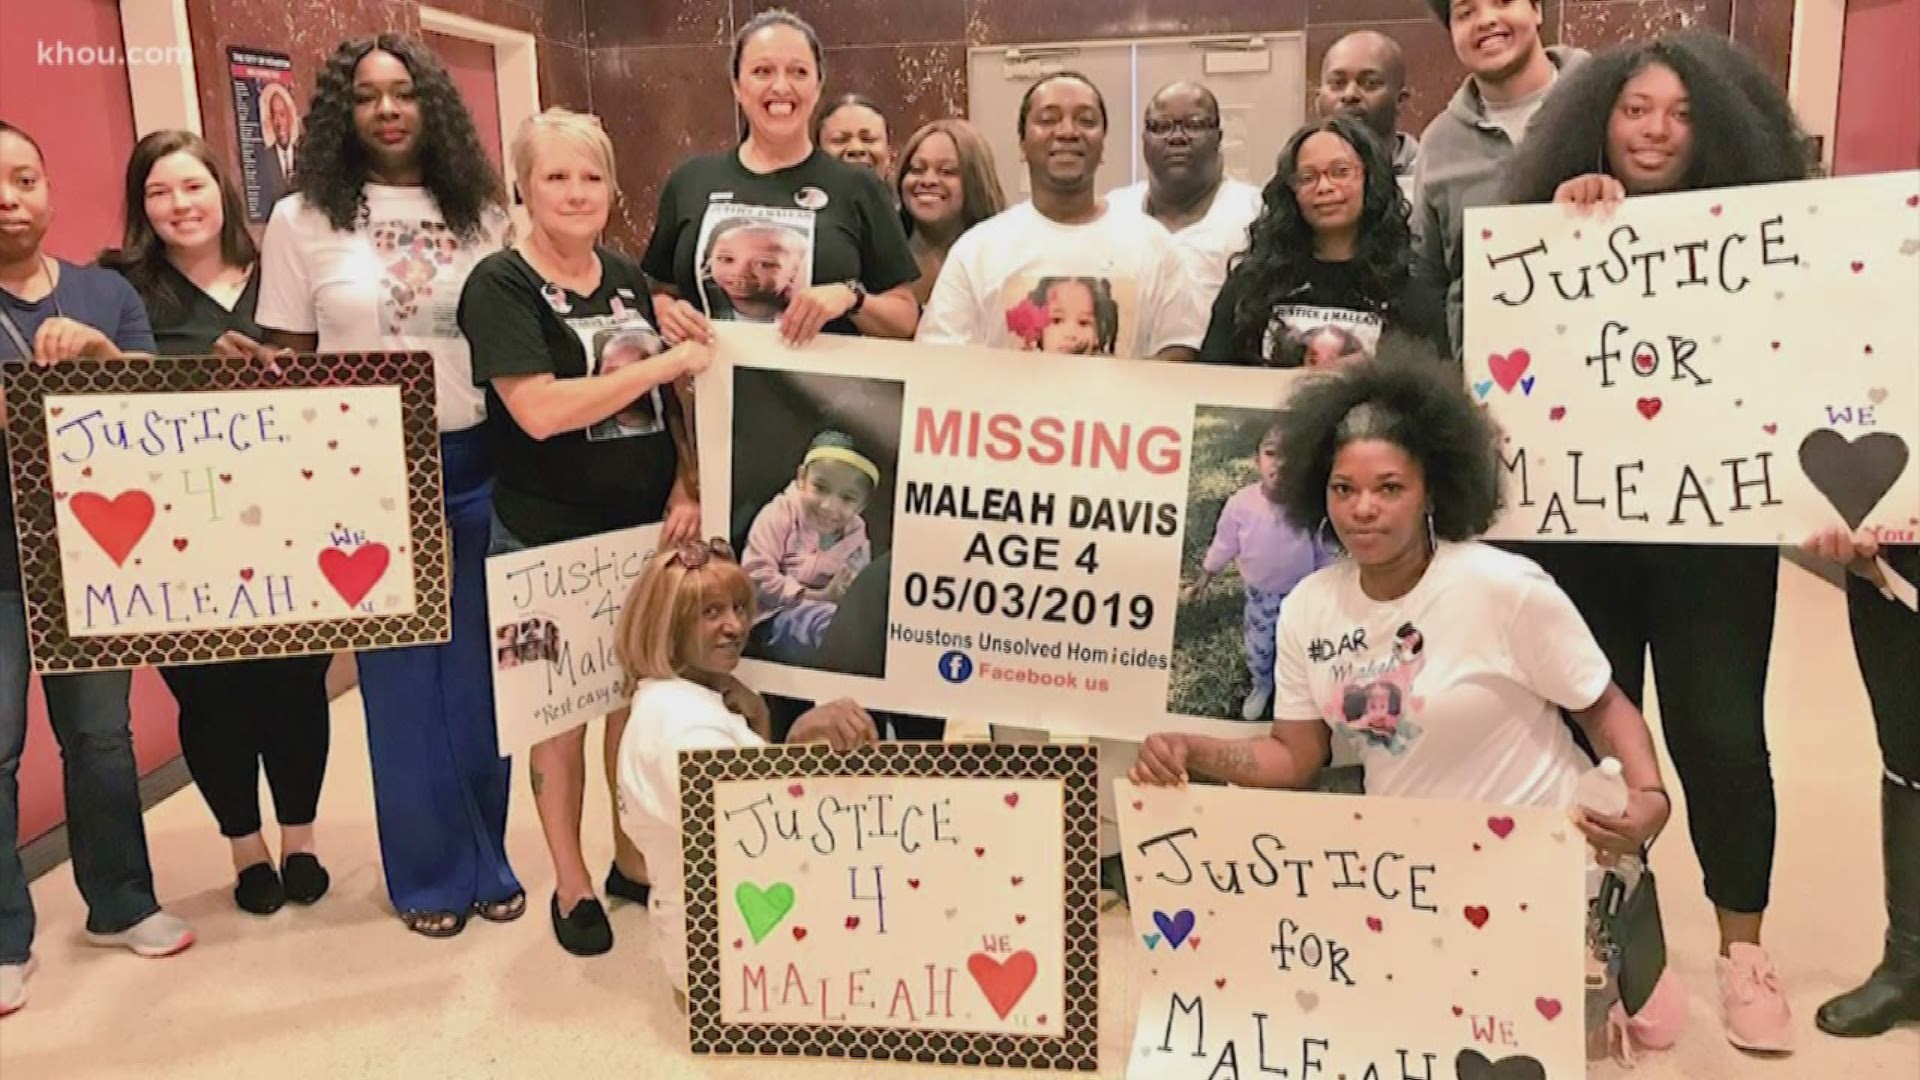 Mayor Sylvester Turner thanked the volunteers who continue searching for missing 4-year-old Maleah Davis.